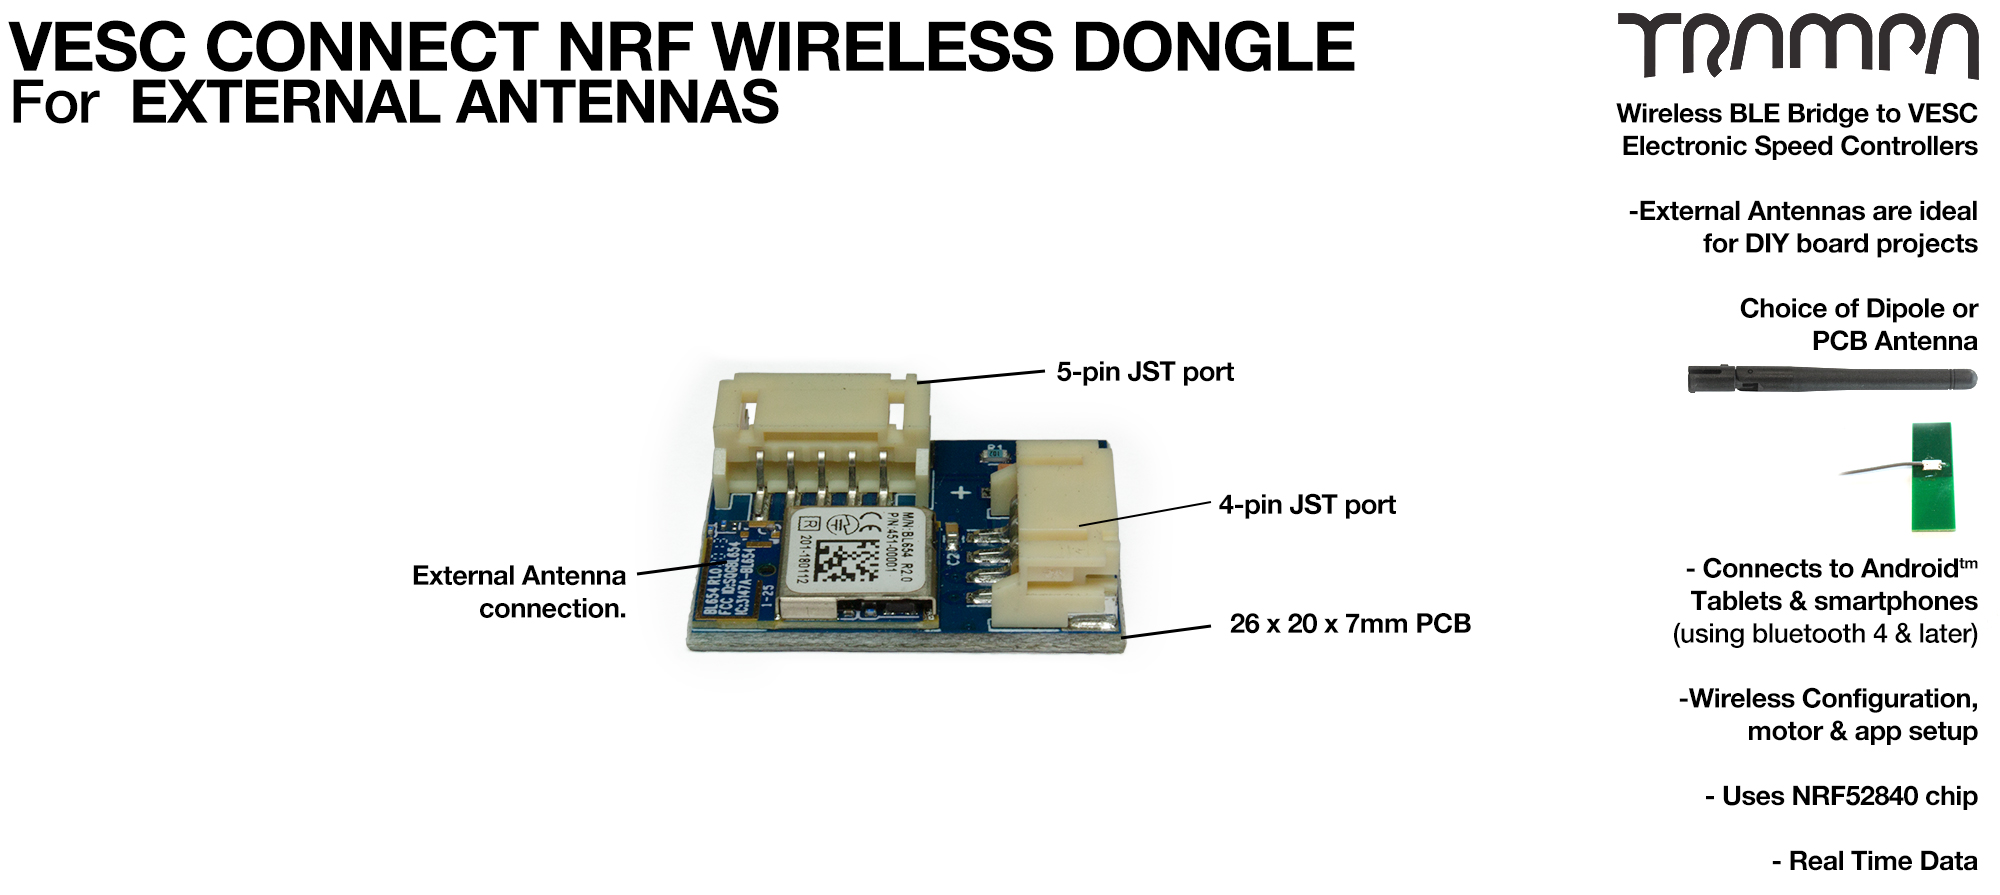 VESC Connect NRF Dongle For EXTERNAL Antenna